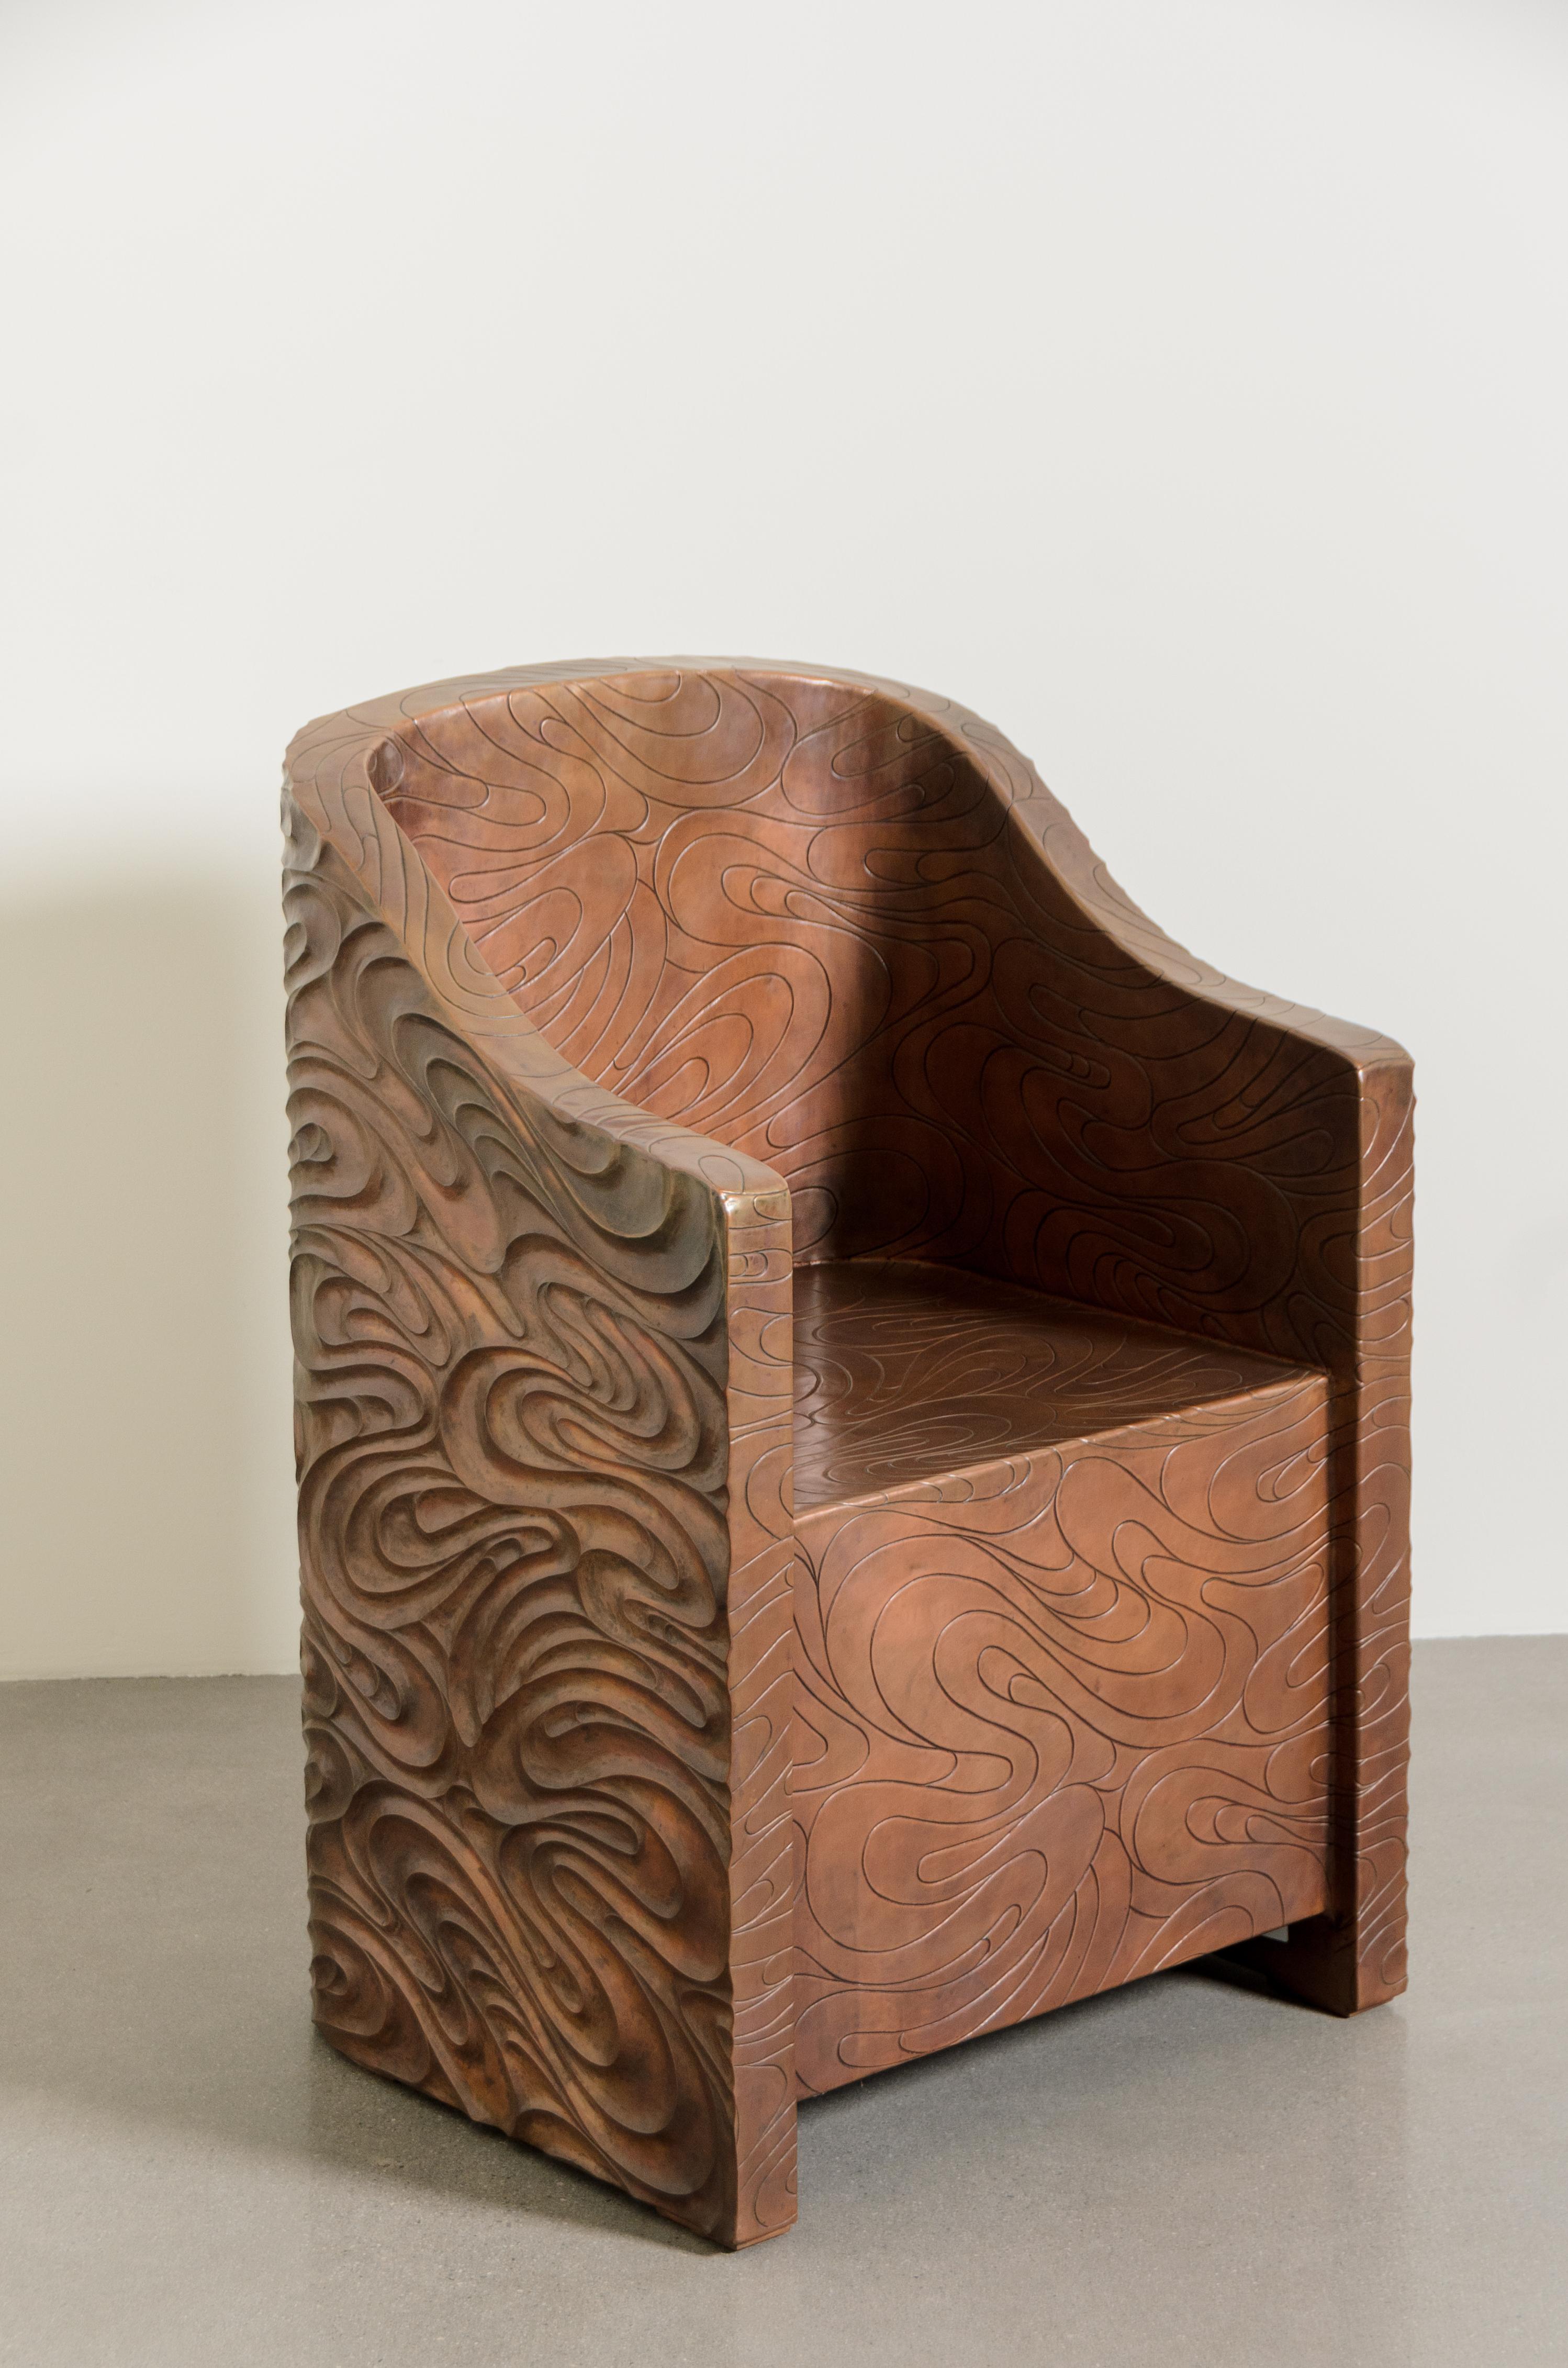 Fei Tian Wen Chair
Antique Copper
Wood Base
Hand Repoussé
Limited Edition
Each piece is individually crafted and is unique. 

Repoussé is the traditional art of hand-hammering decorative relief onto sheet metal. The technique originated around 800